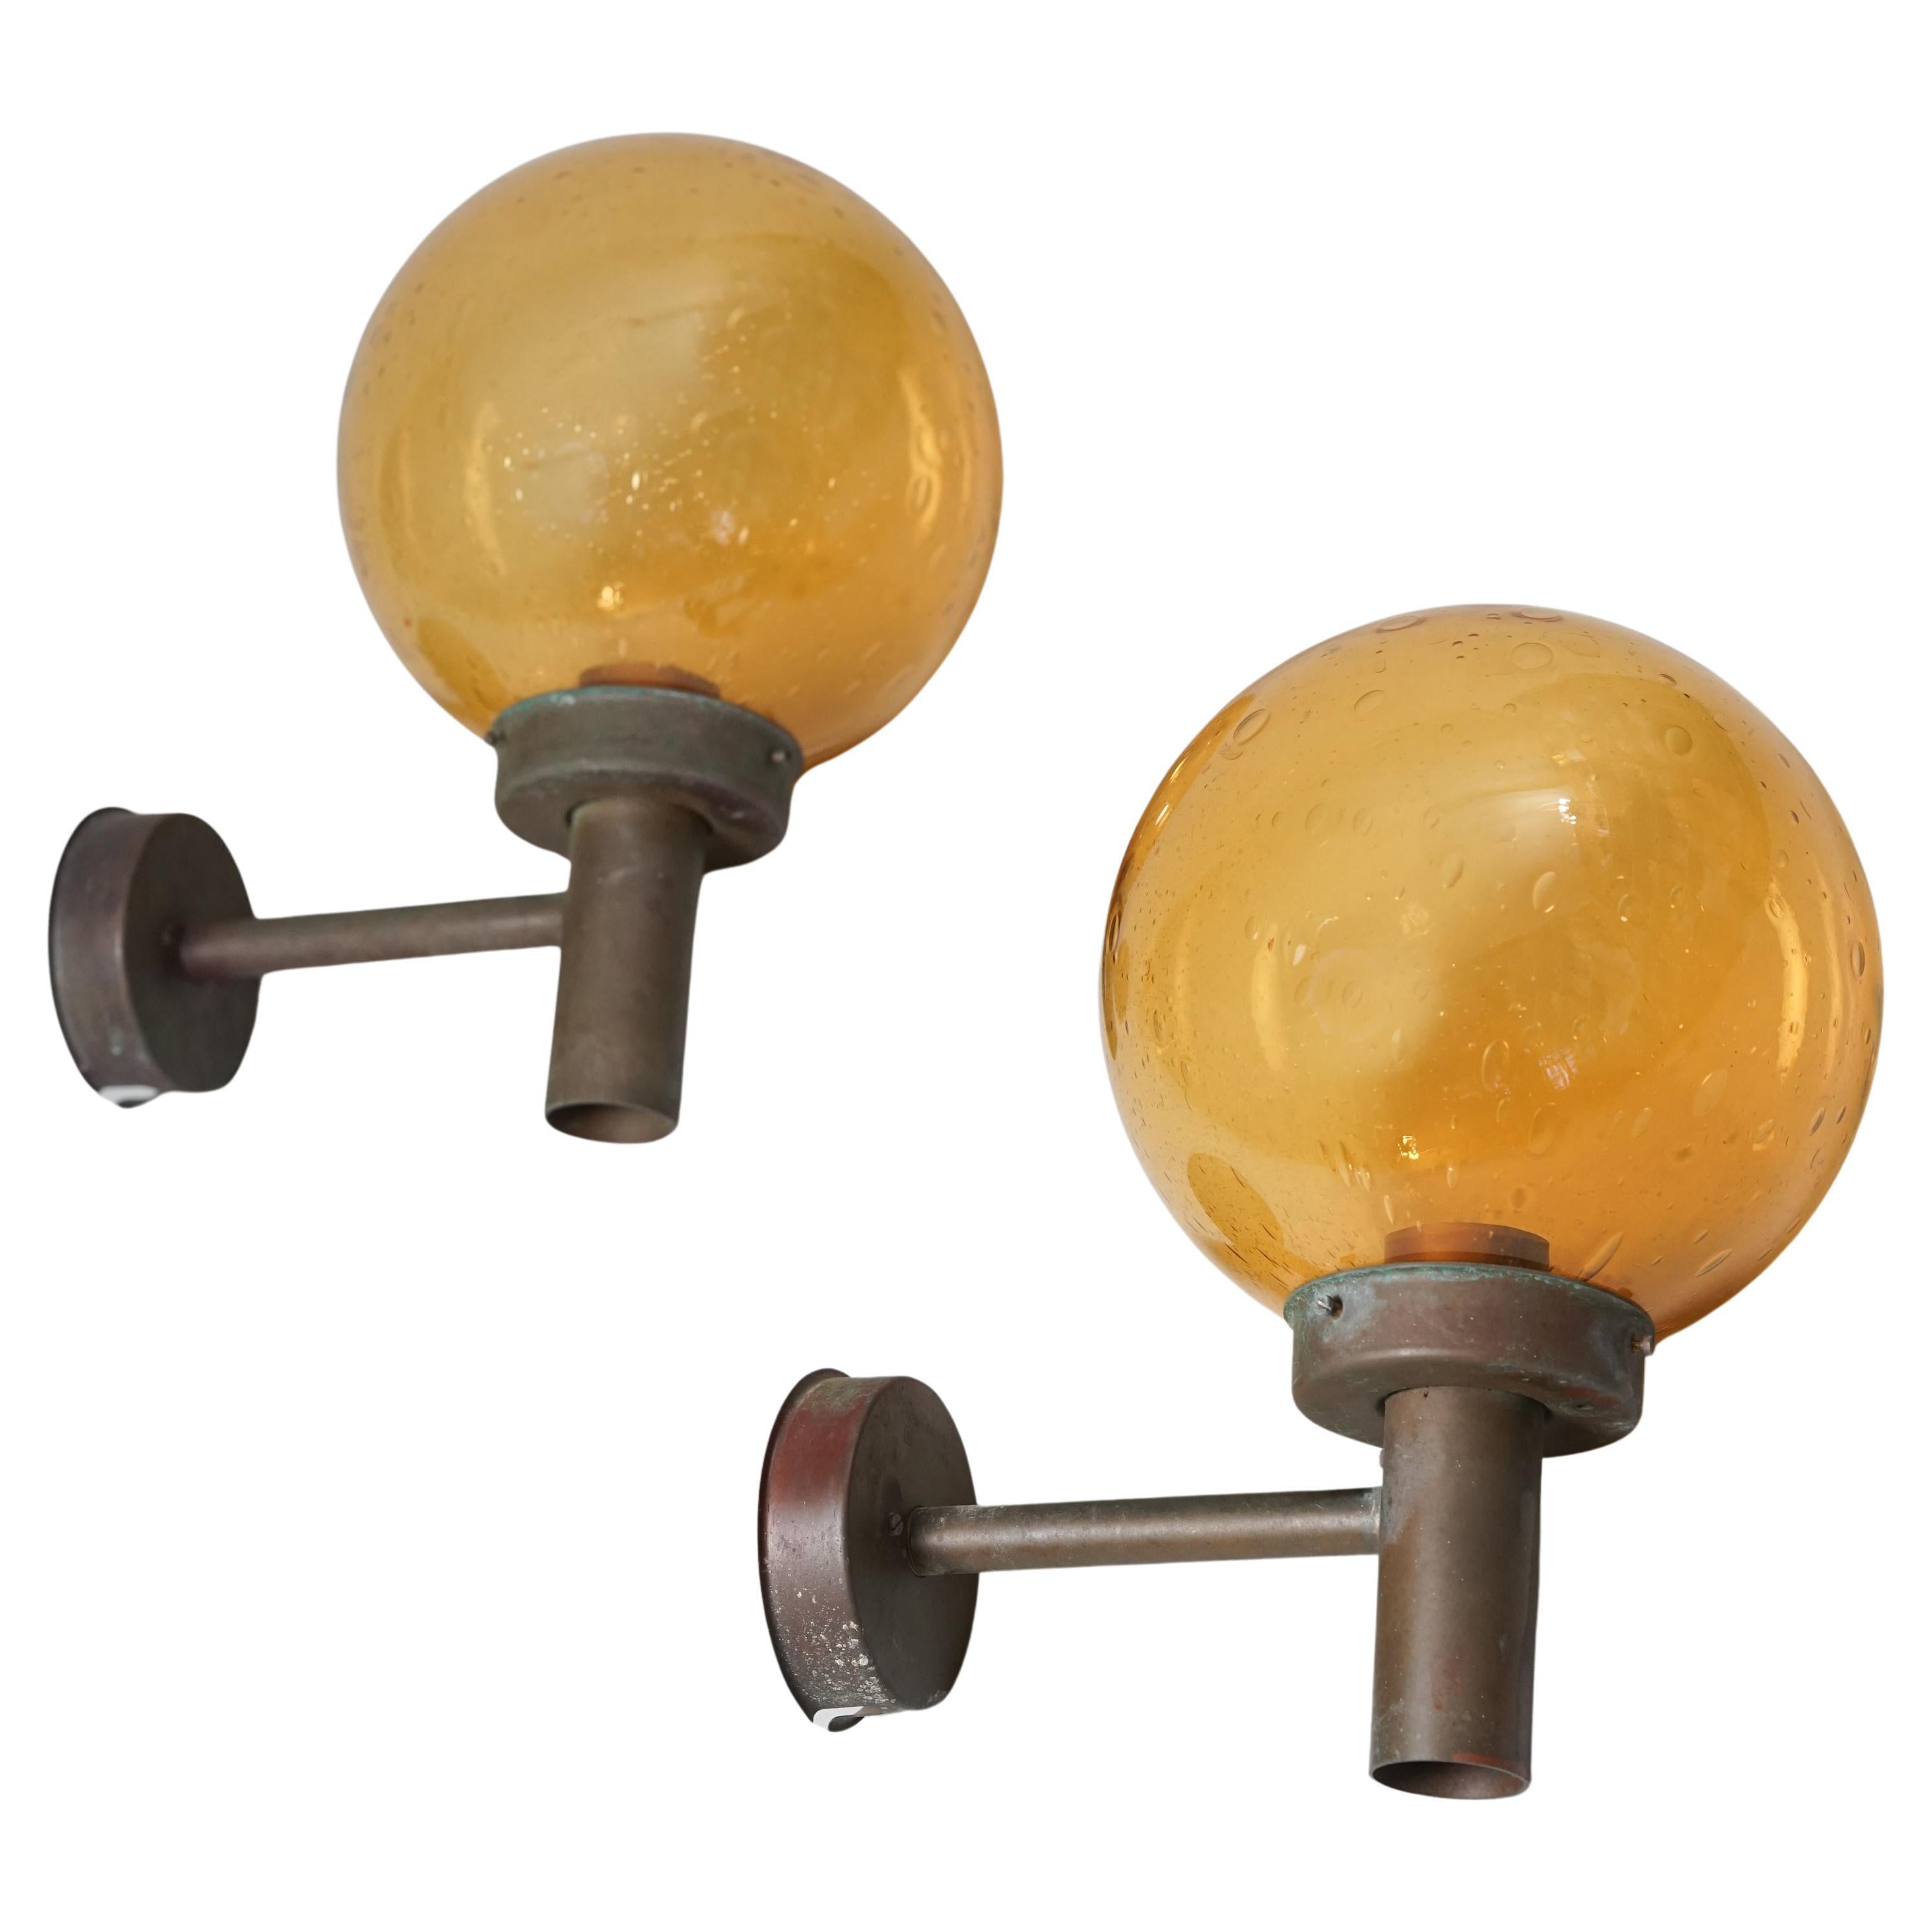 Pair of Outdoor Wall Lights, Lisa Johansson-Pape, Orno Oy, 1950s